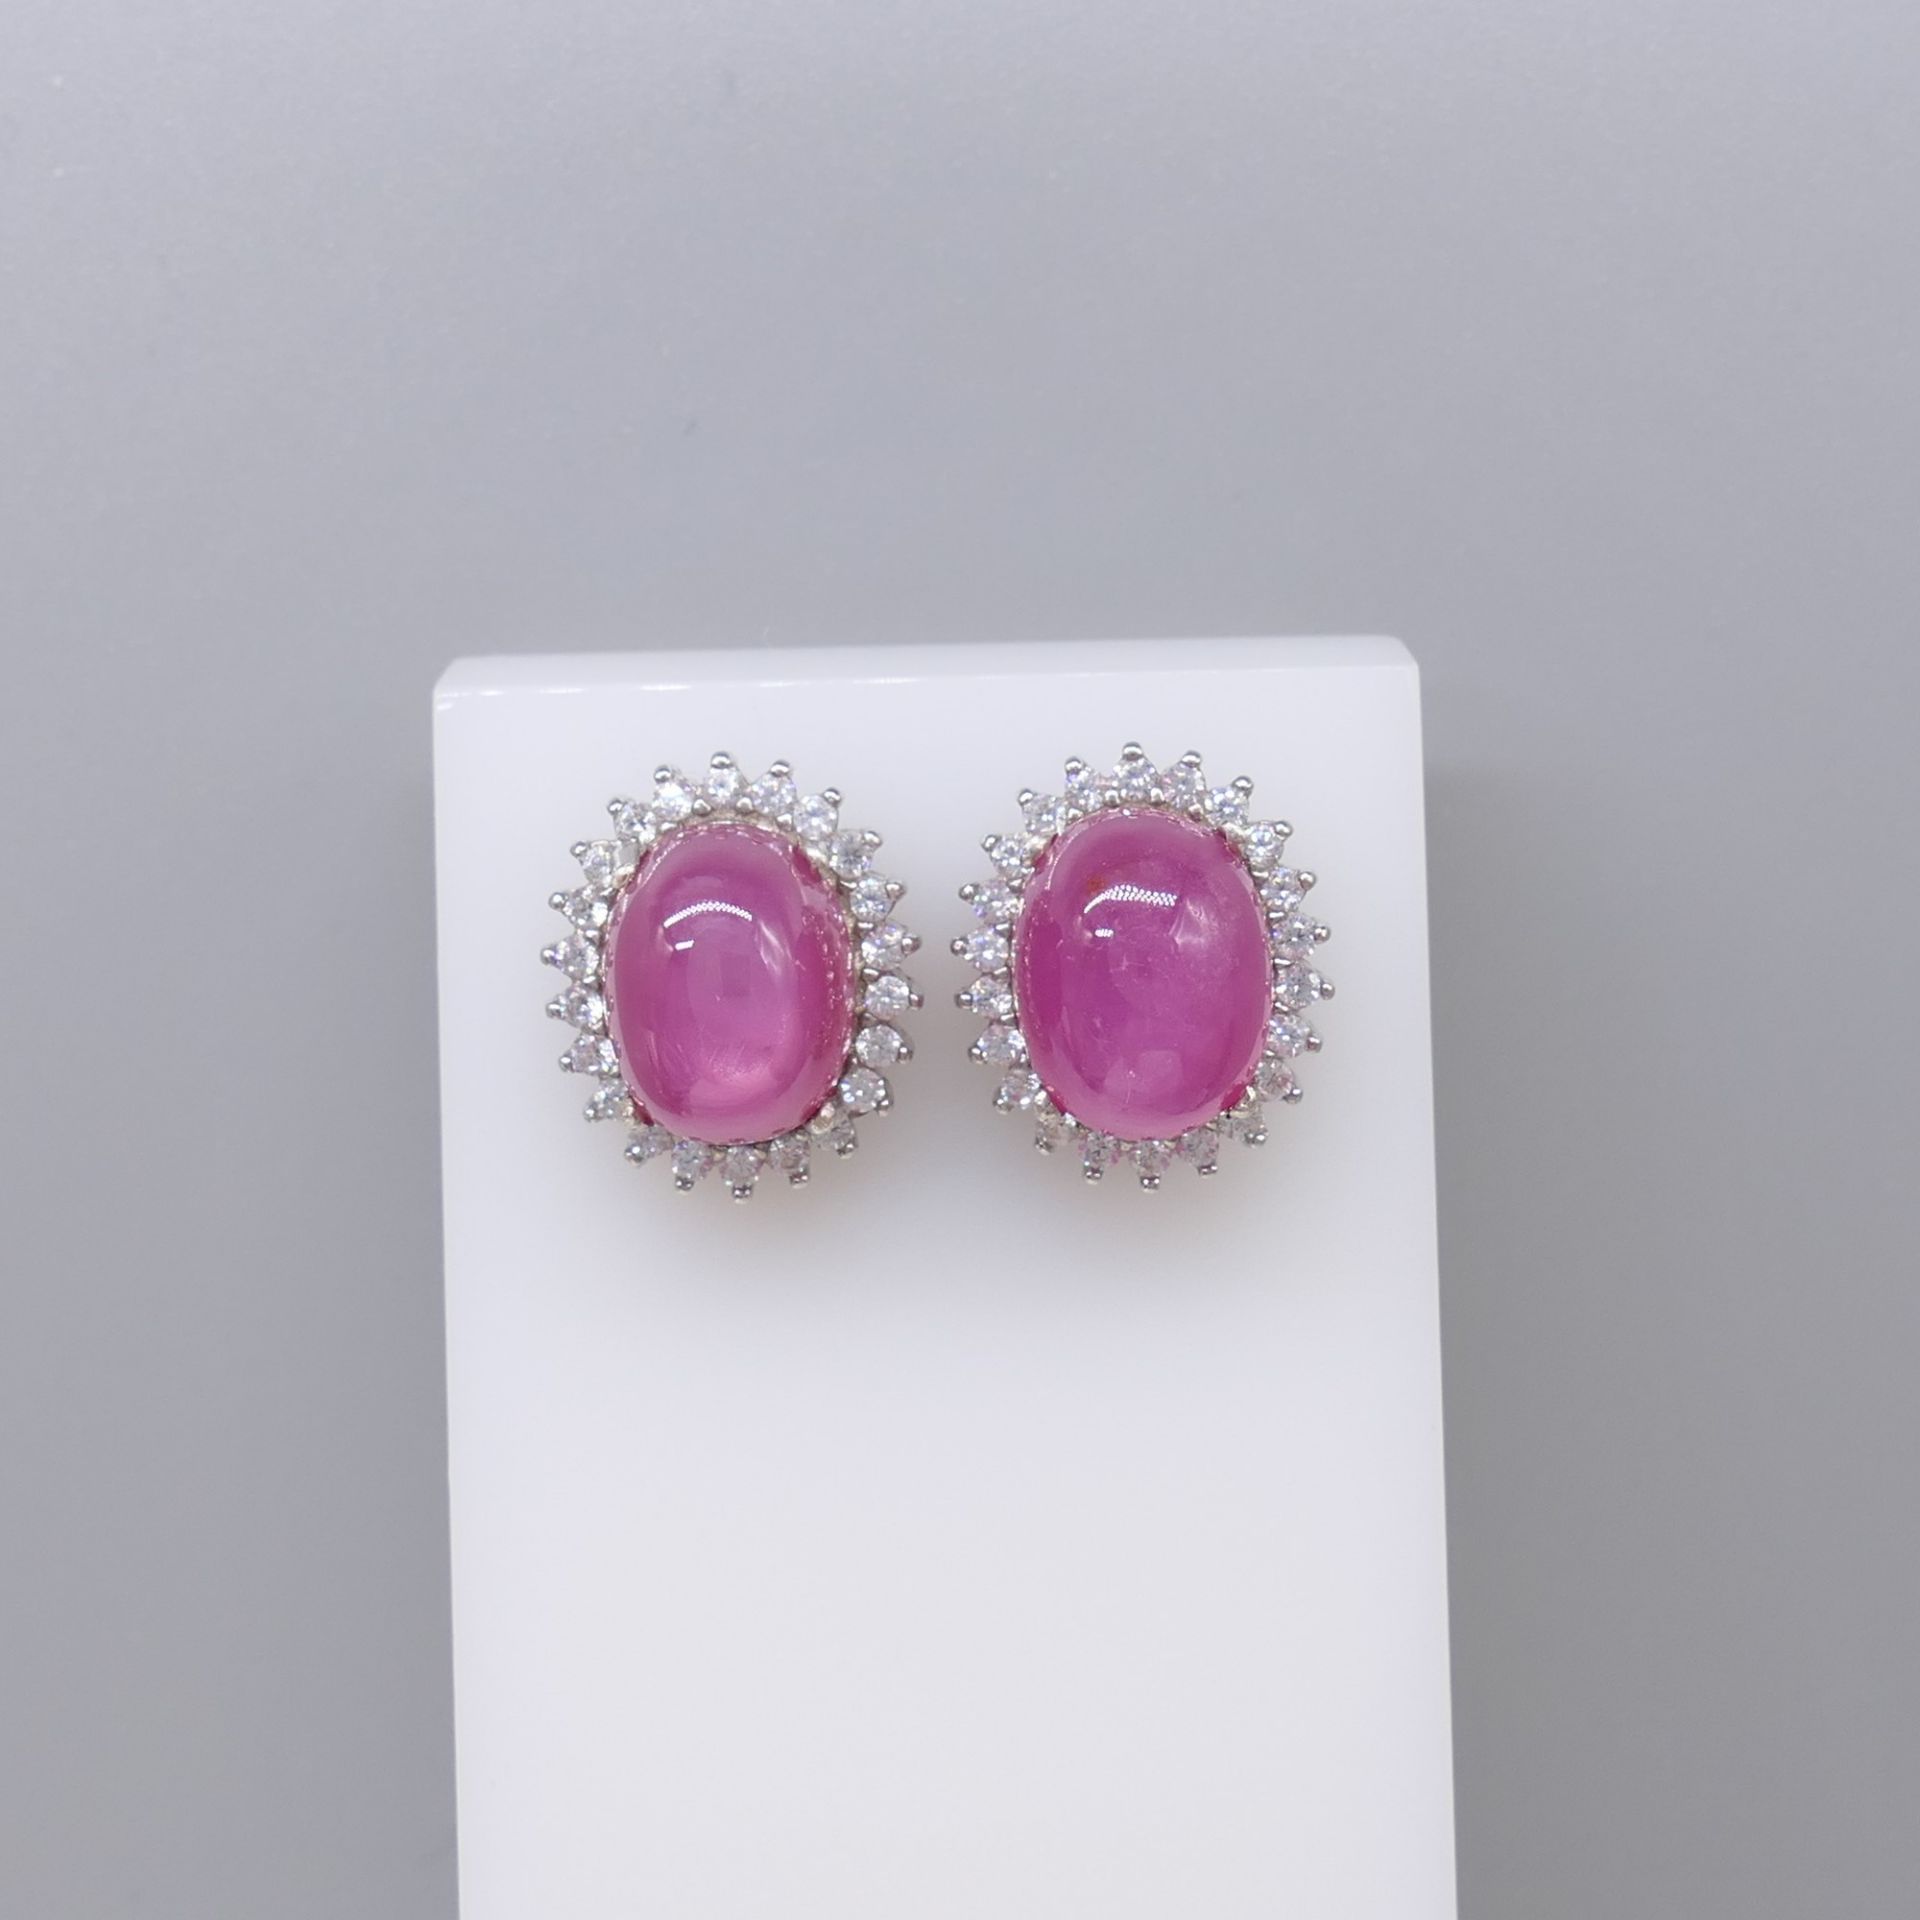 Cabochon Ruby Ear Studs In Sterling Silver, Boxed